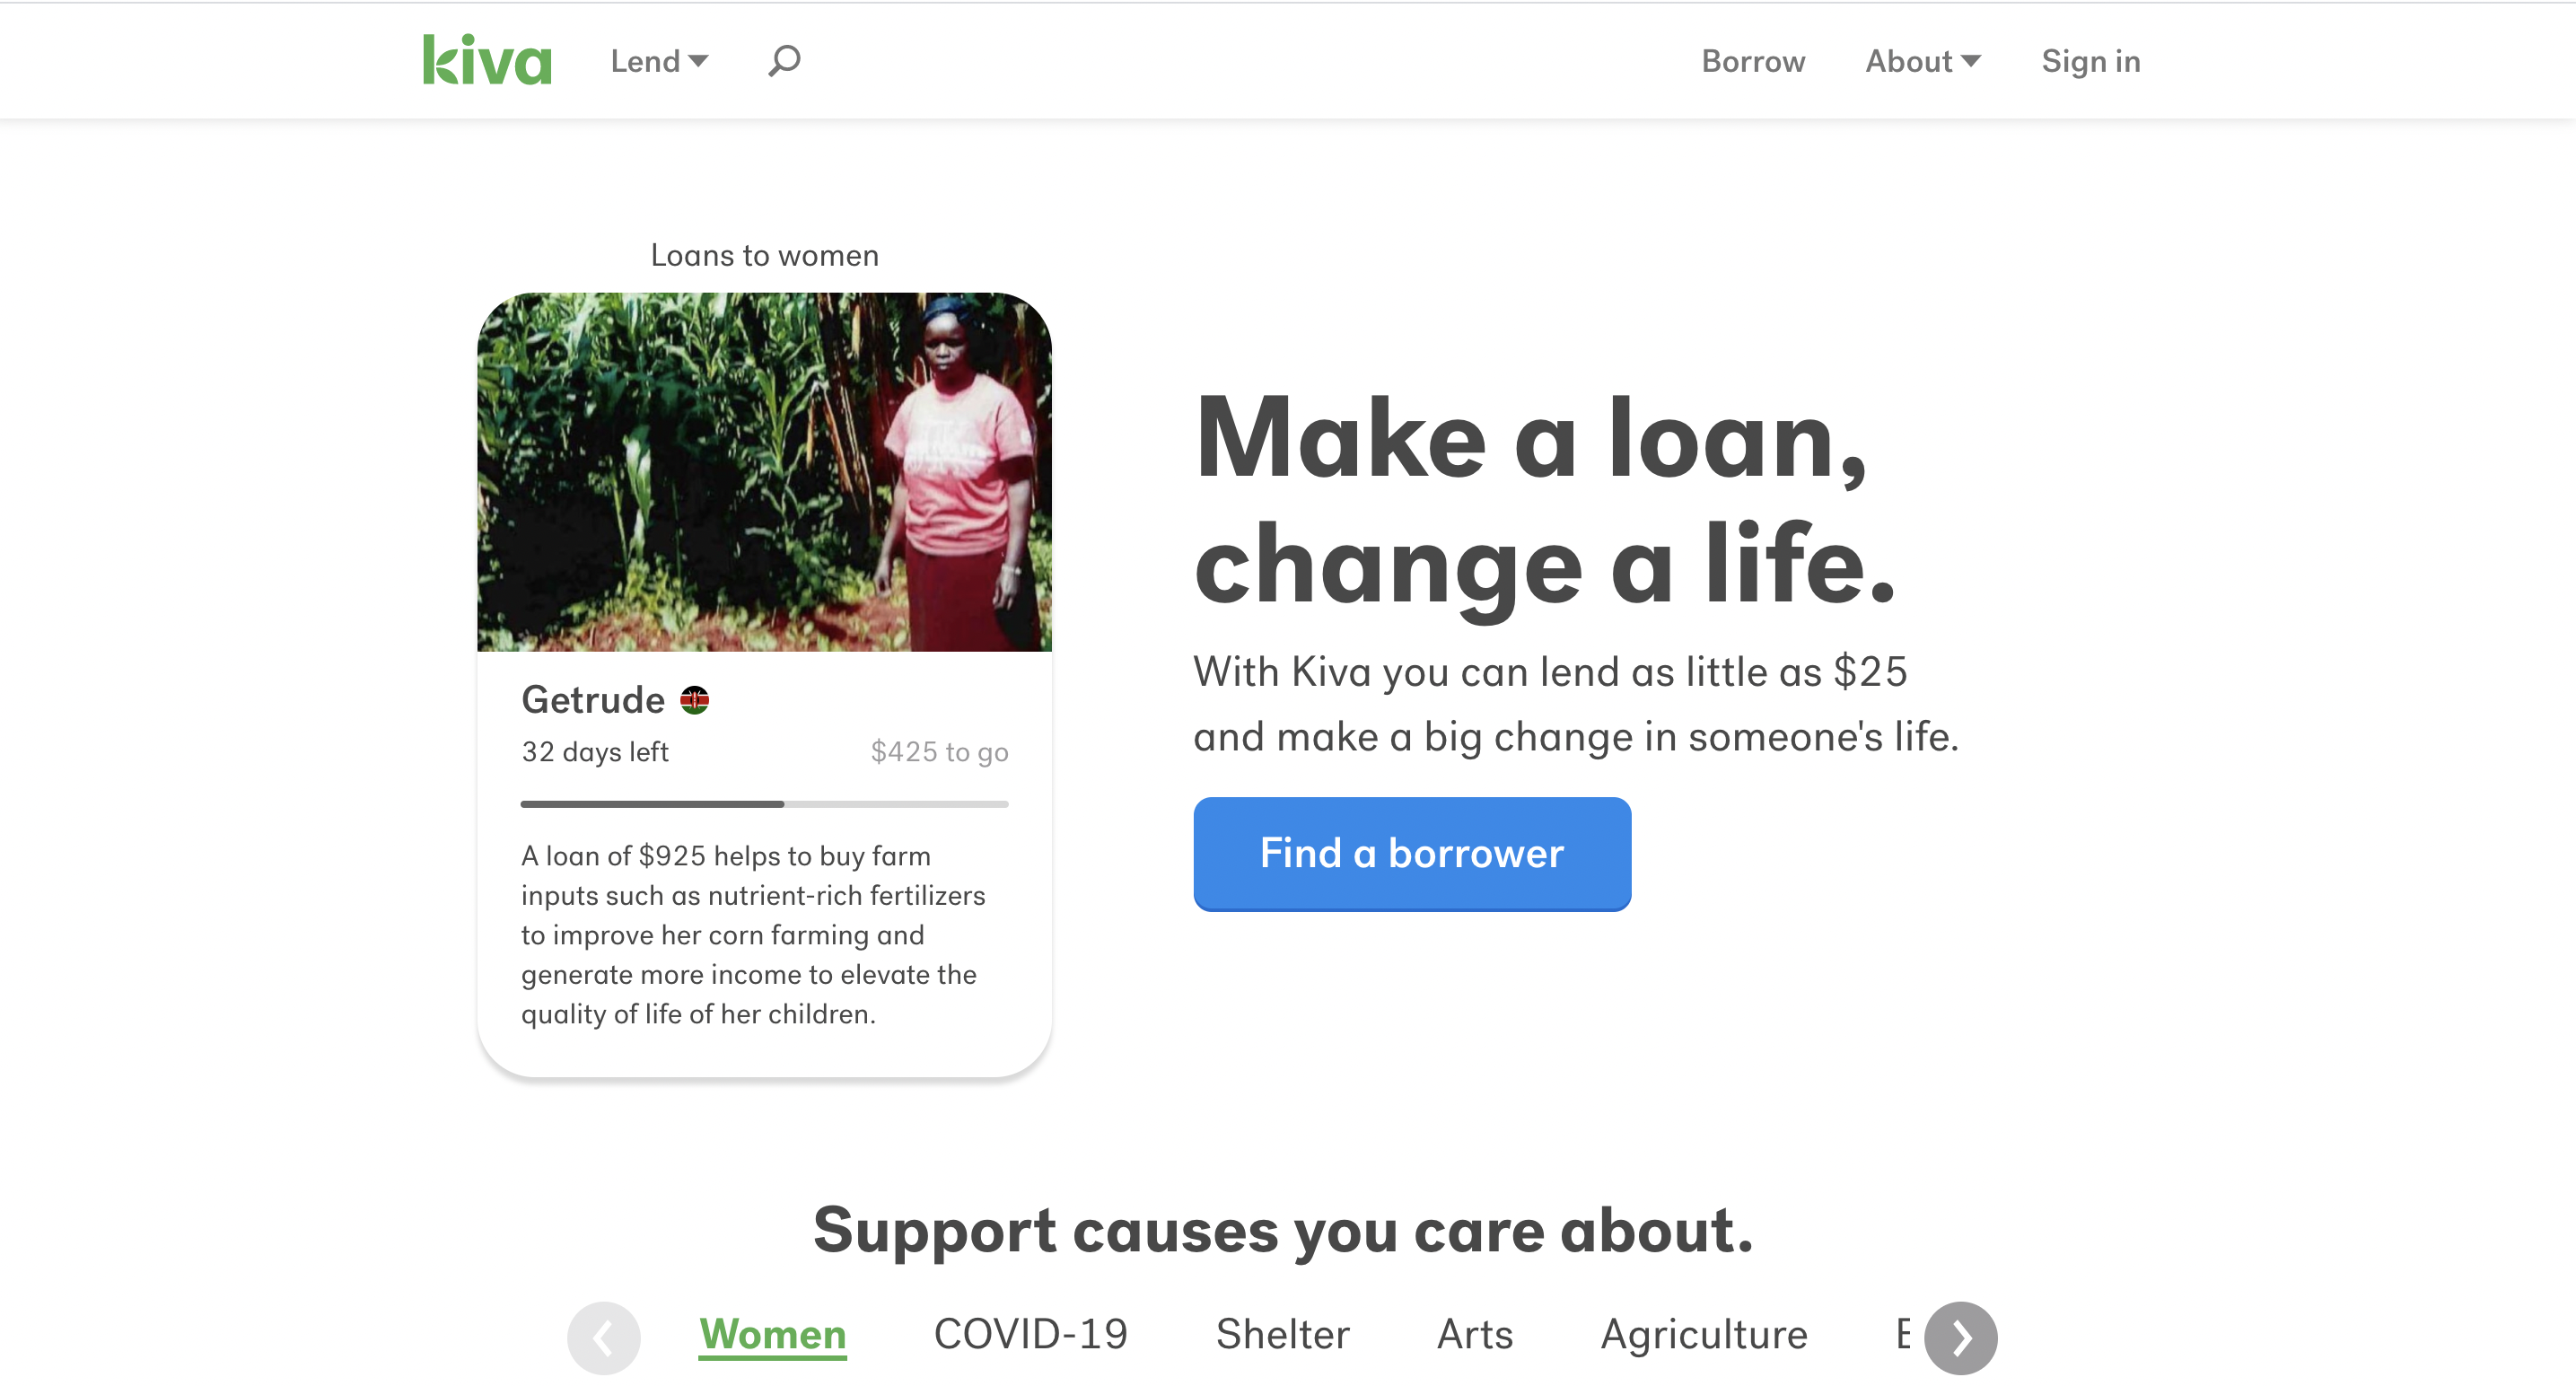 Kiva homepage screenshot showing micro-loan opportunity and a call to action to invest